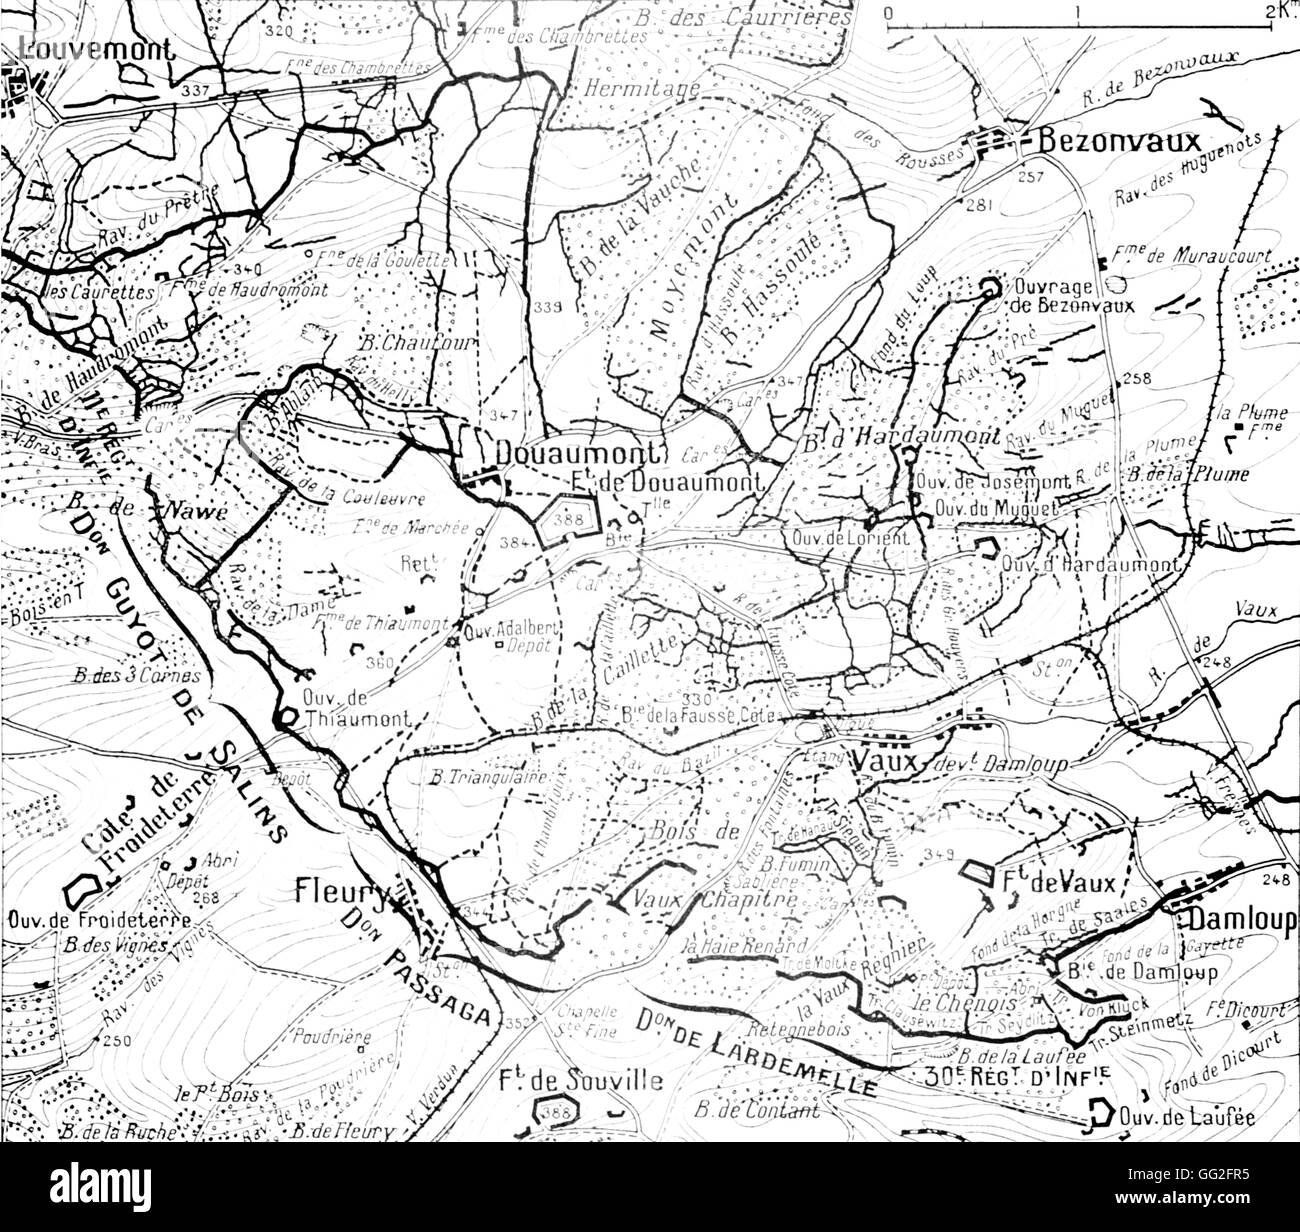 First World War. Map of positions at the time of the Battle of Verdun and the land around the forsts of Douaumont and Vaux with an indication of attacking front lines of the French divisions on 24th October 1916. Stock Photo